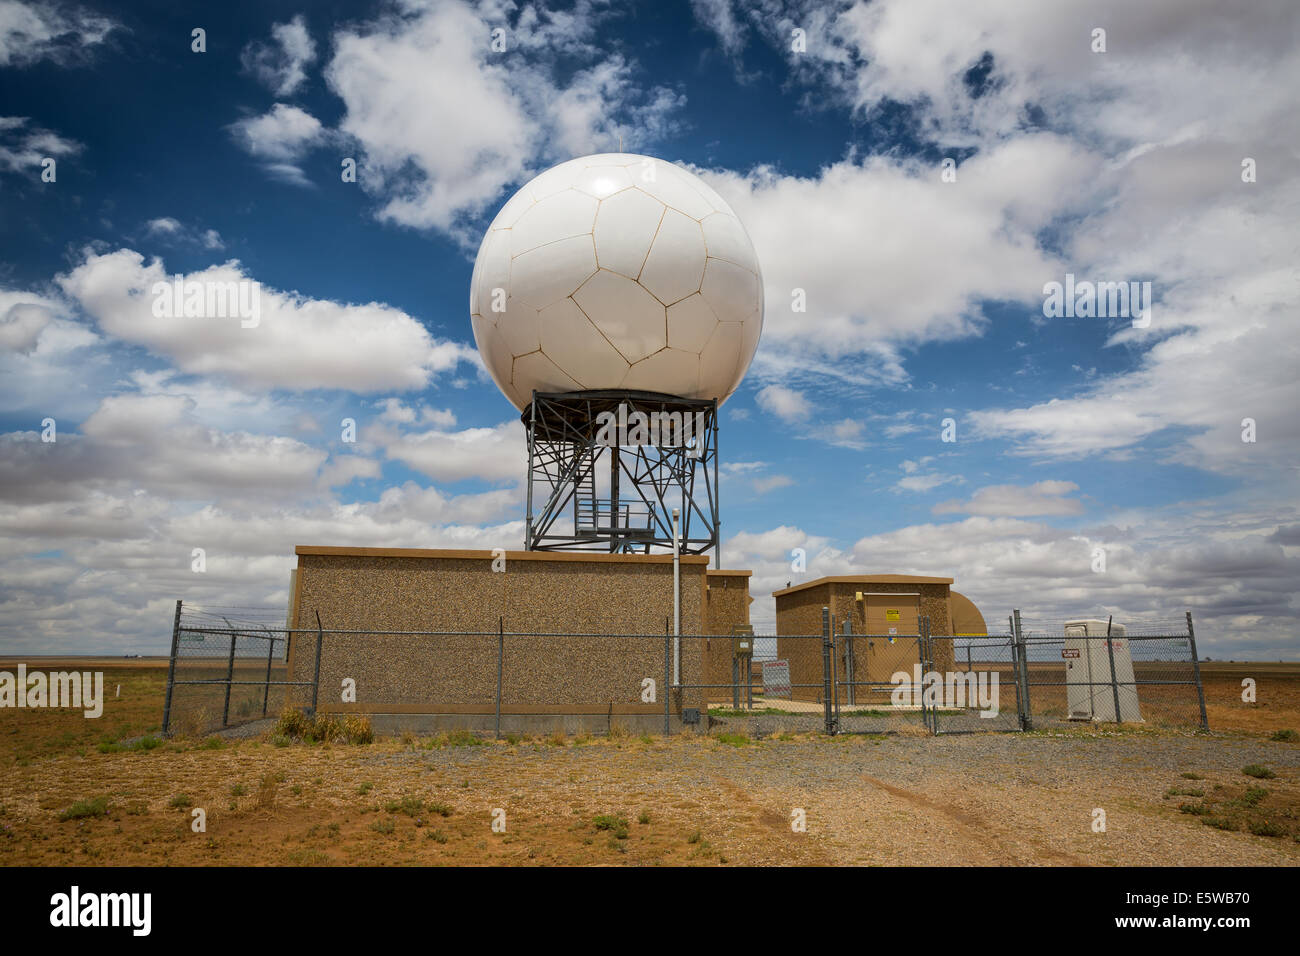 The National Weather Service Cannon Air Force Base New Mexico Nexrad KFDX radar dome and supporting infrastructure is visible. Stock Photo